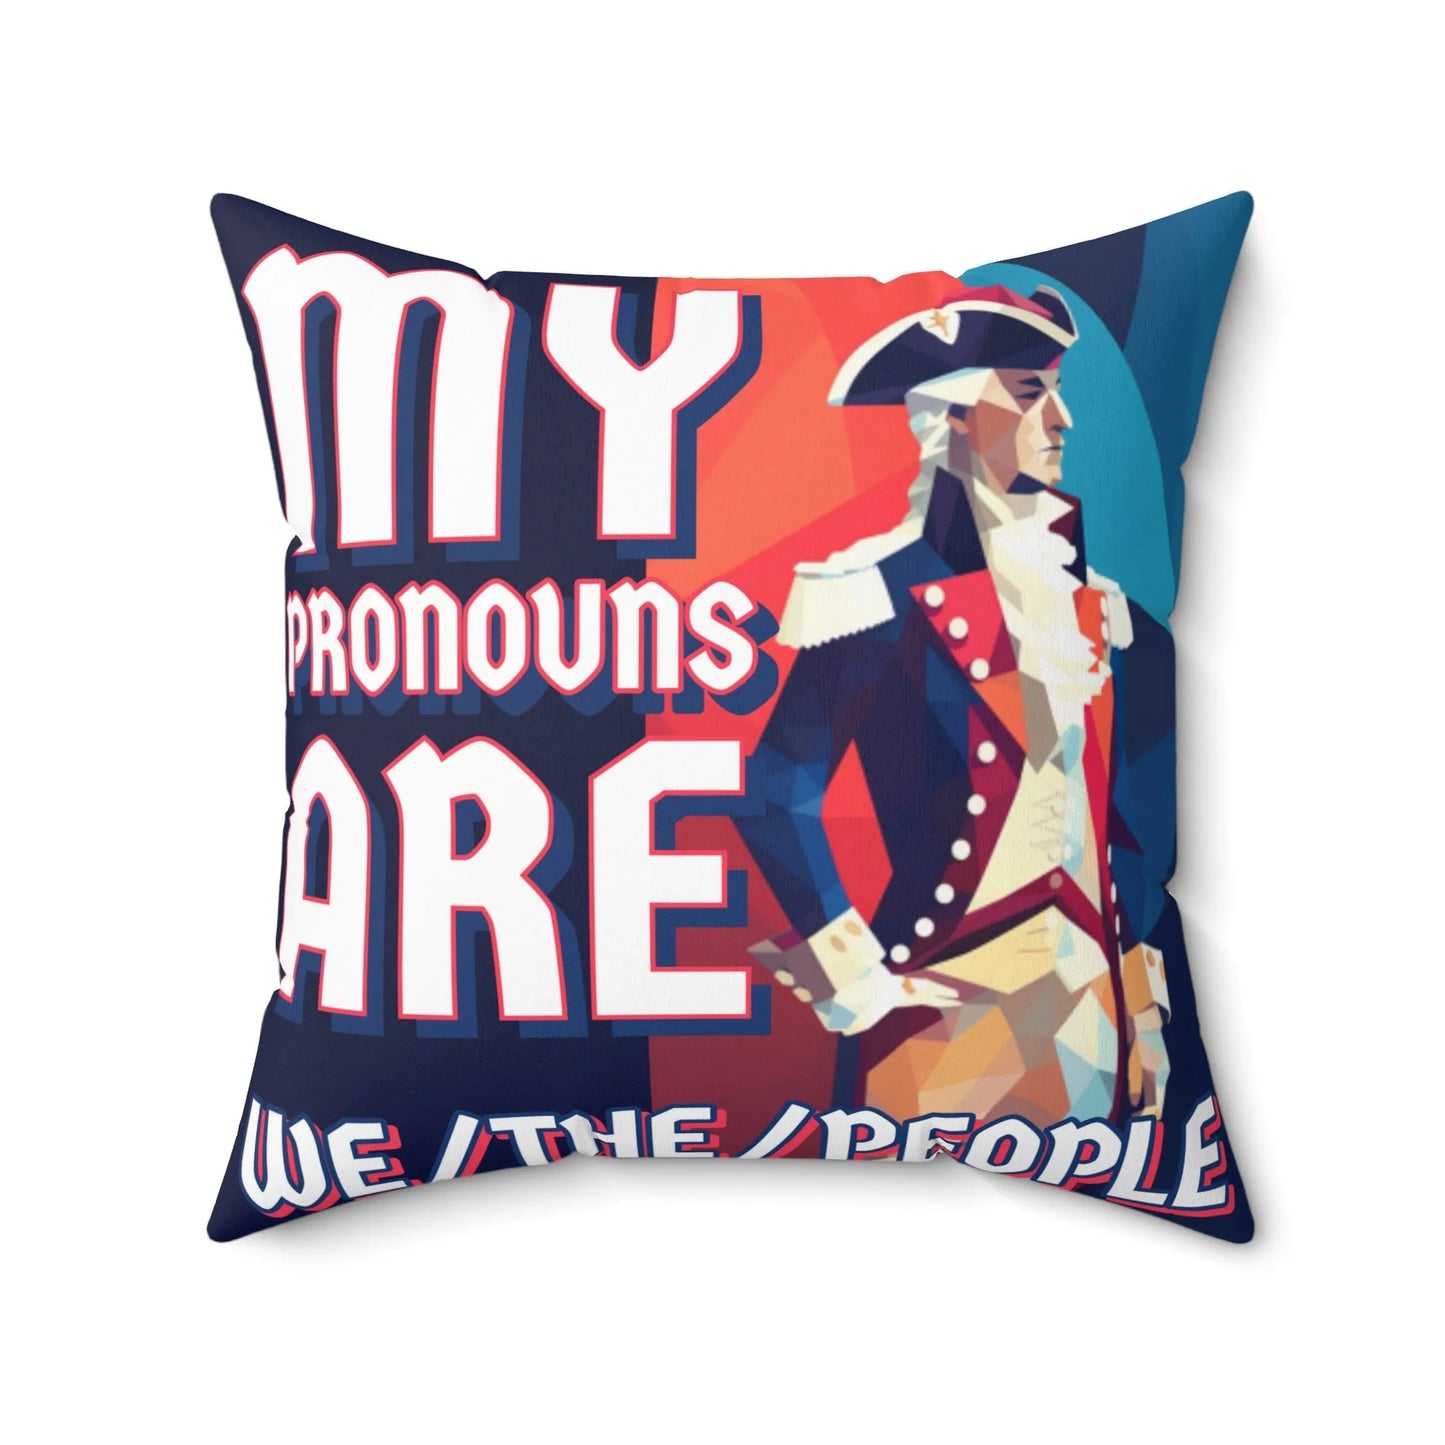 My Pronouns Are "We/The/People" Square Pillow